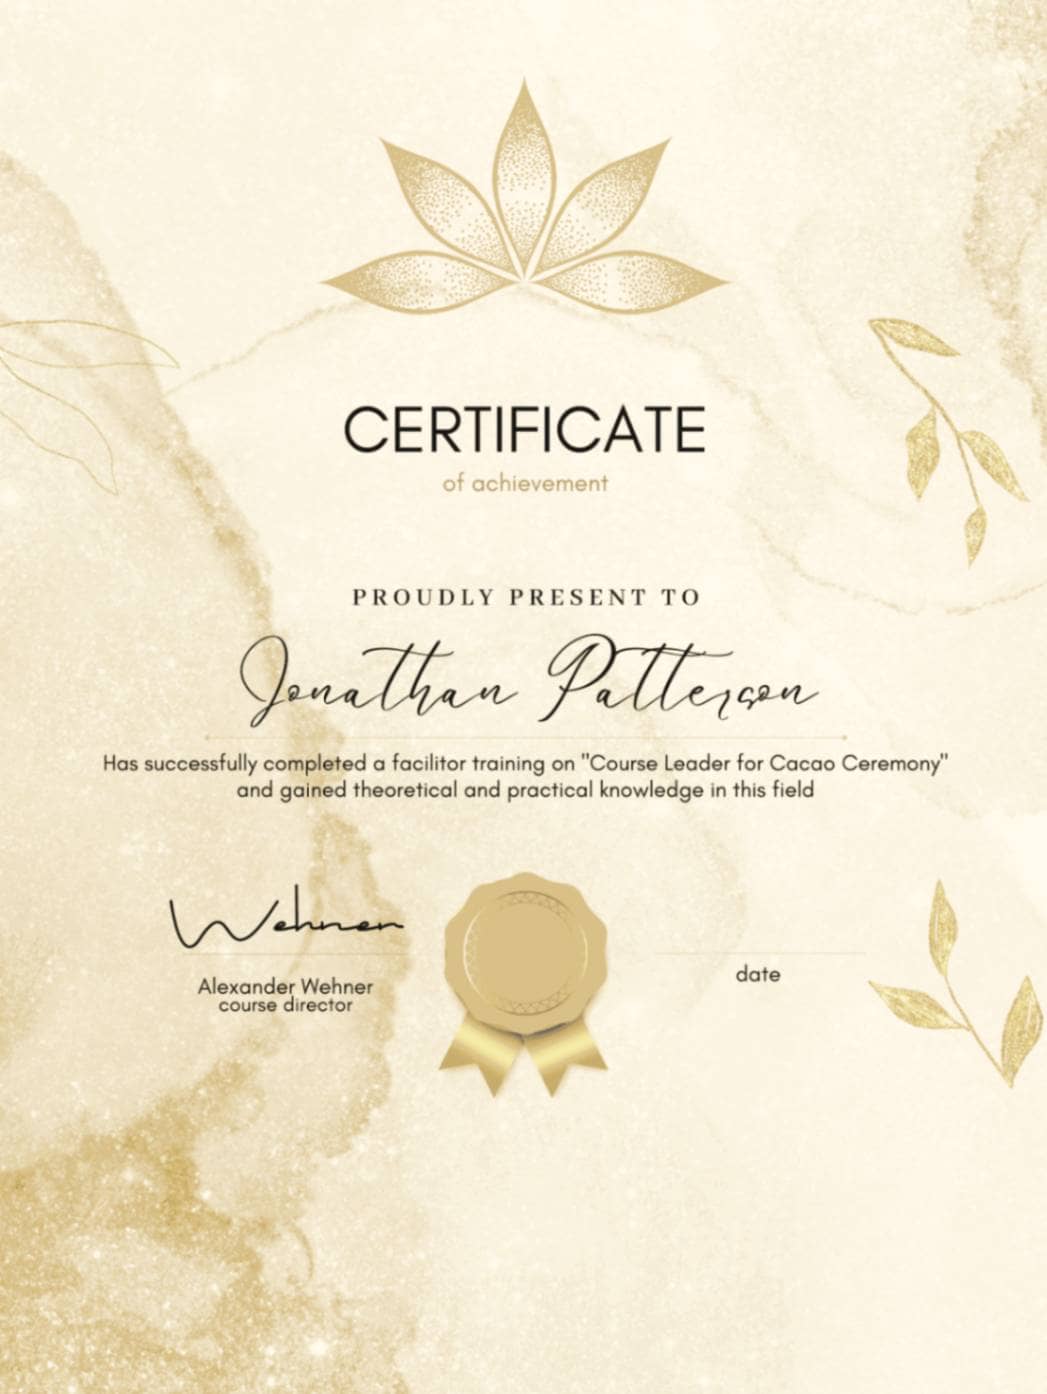 World of Cacao Certificate